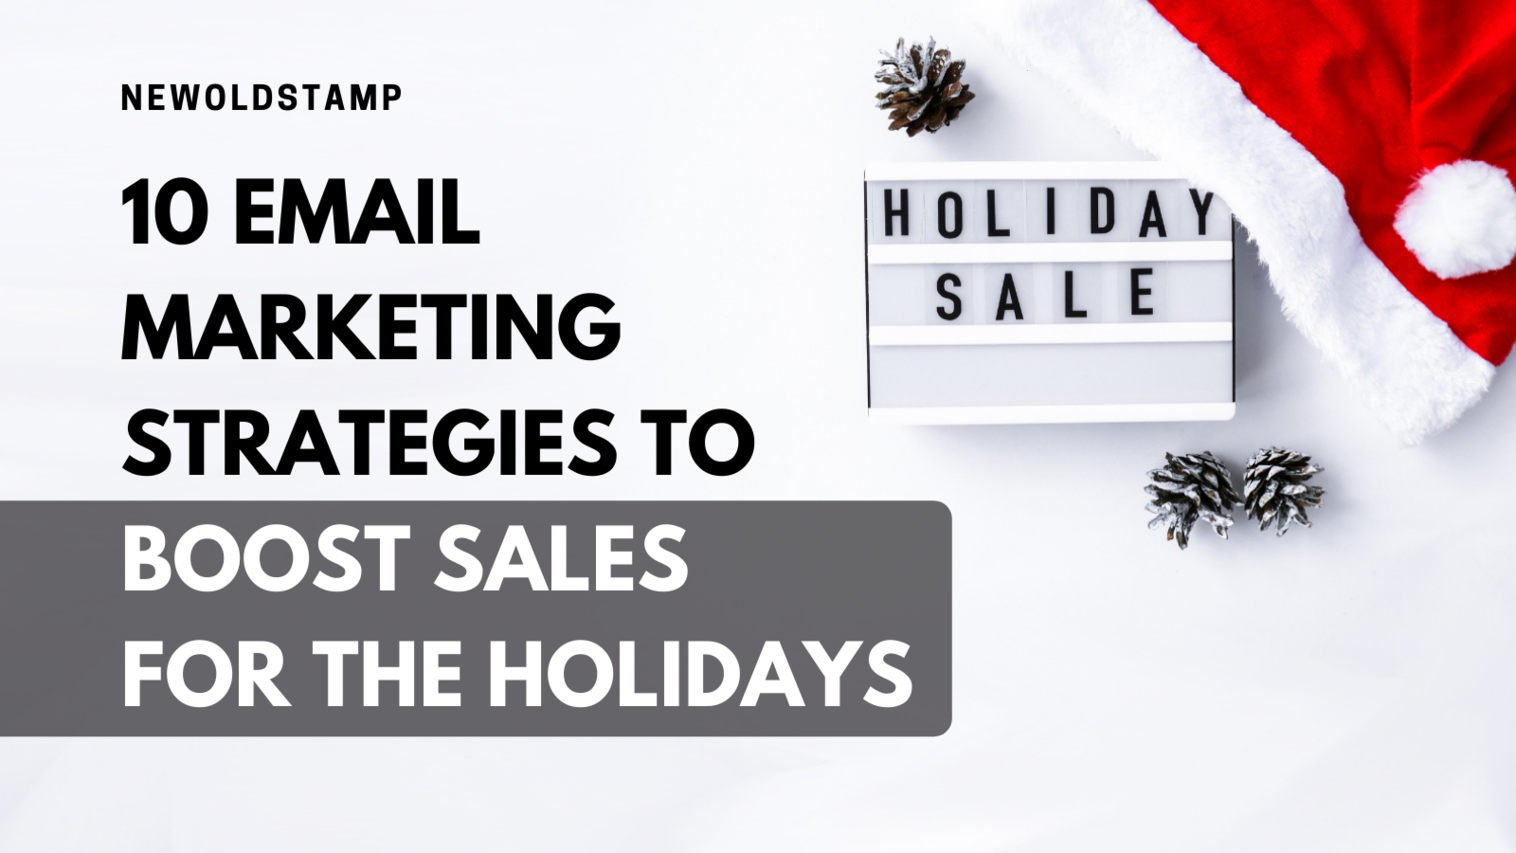 10 Email Marketing Strategies to Boost Sales for the Holidays